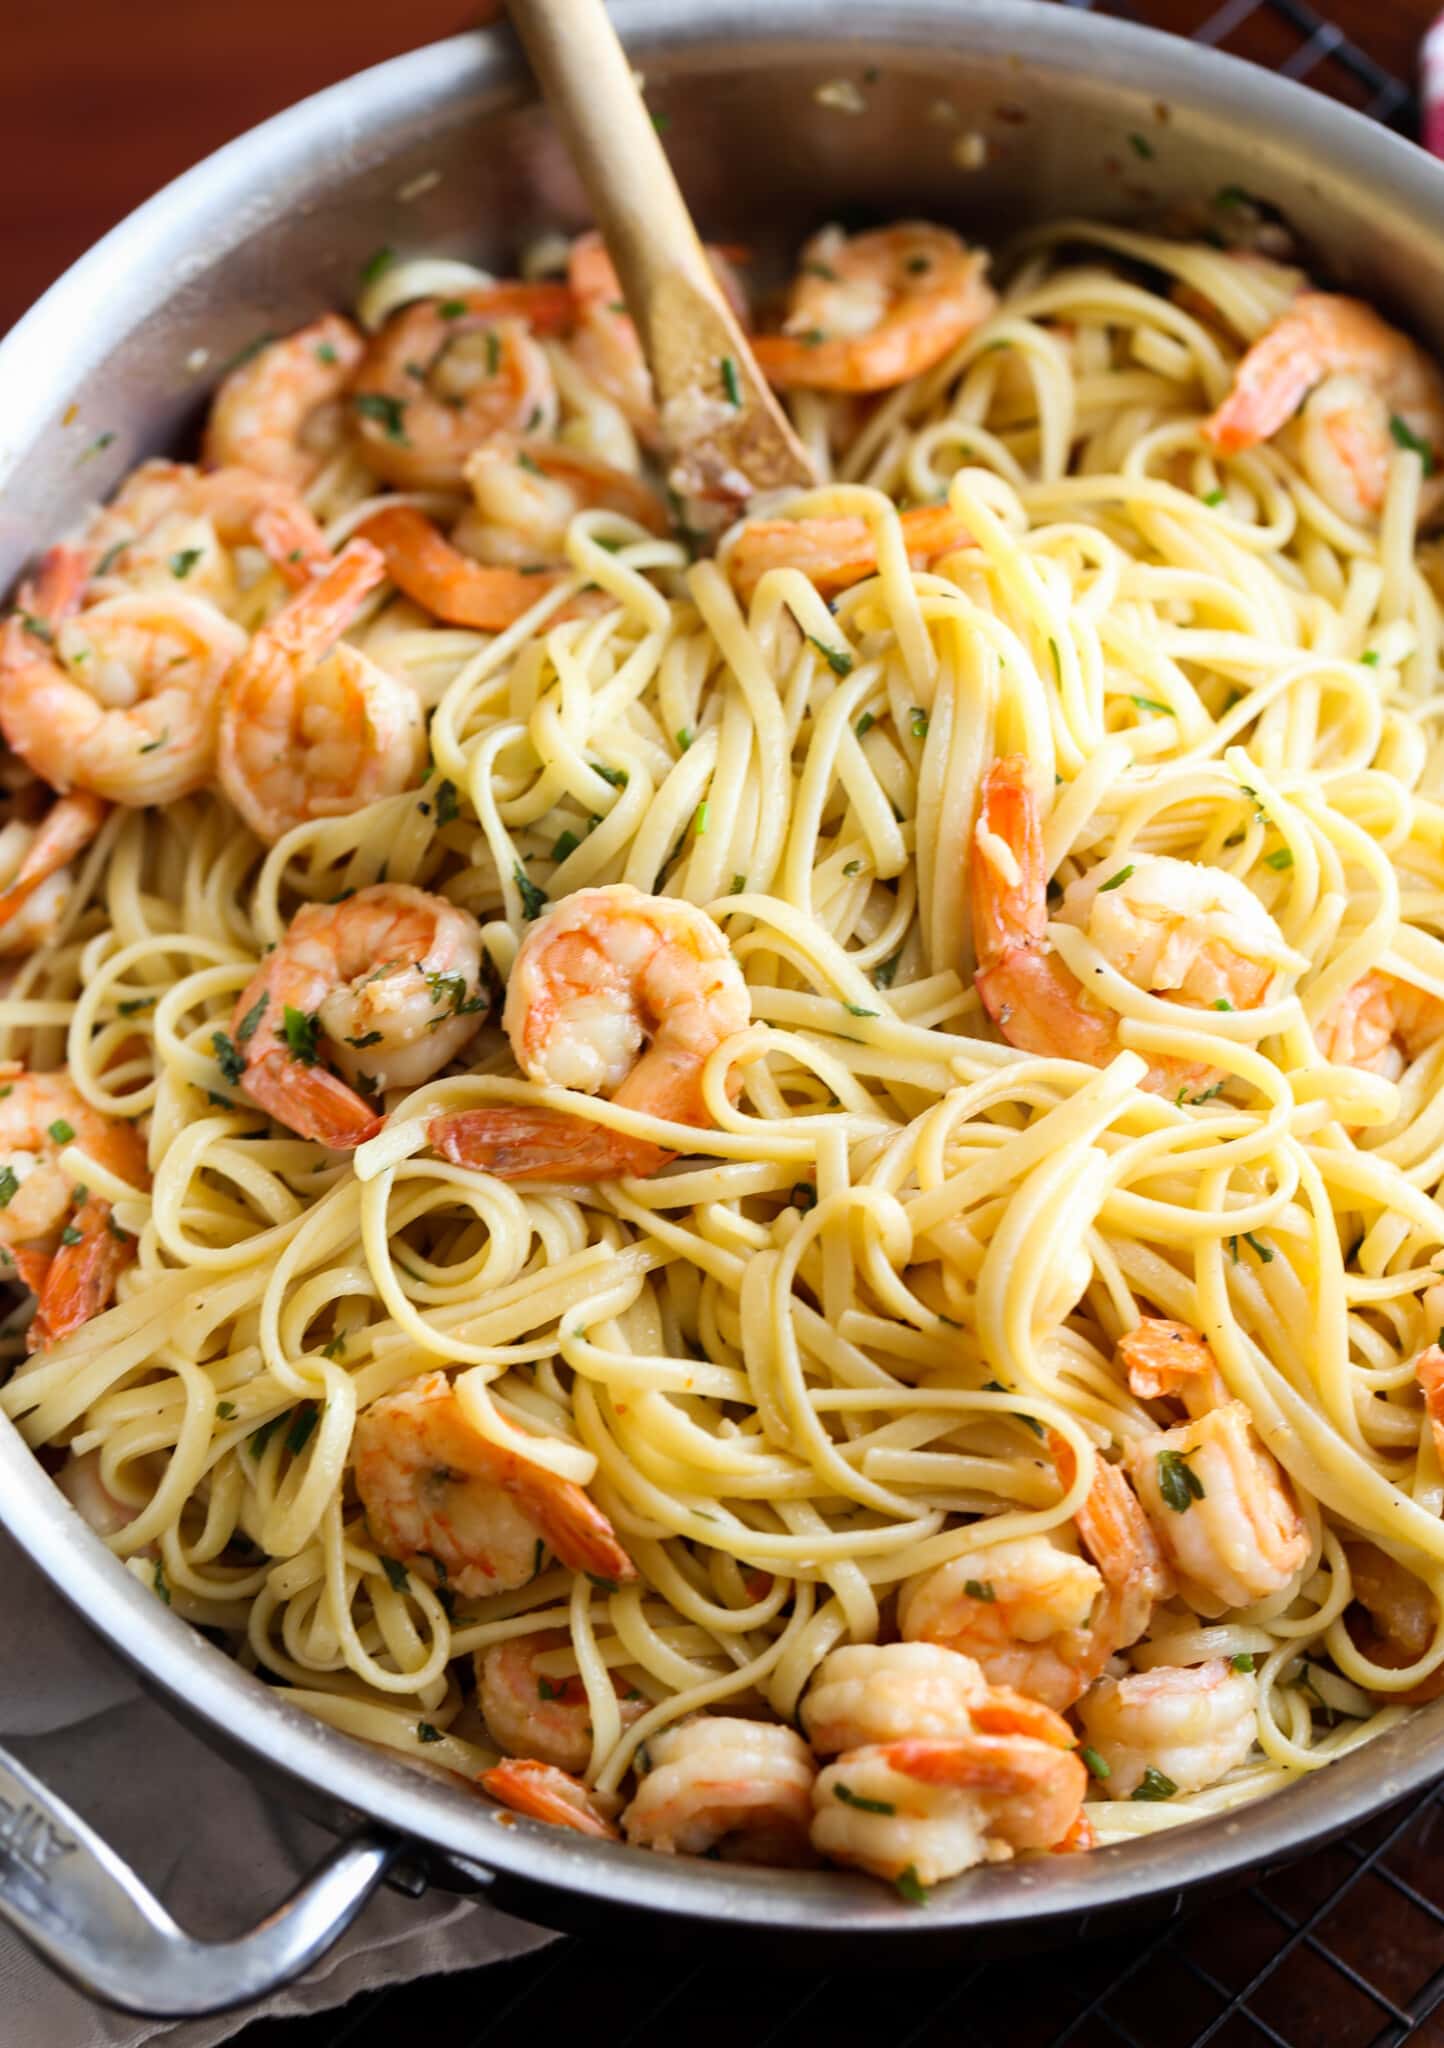 Garlic Butter Shrimp Scampi Recipe | Cookies and Cups